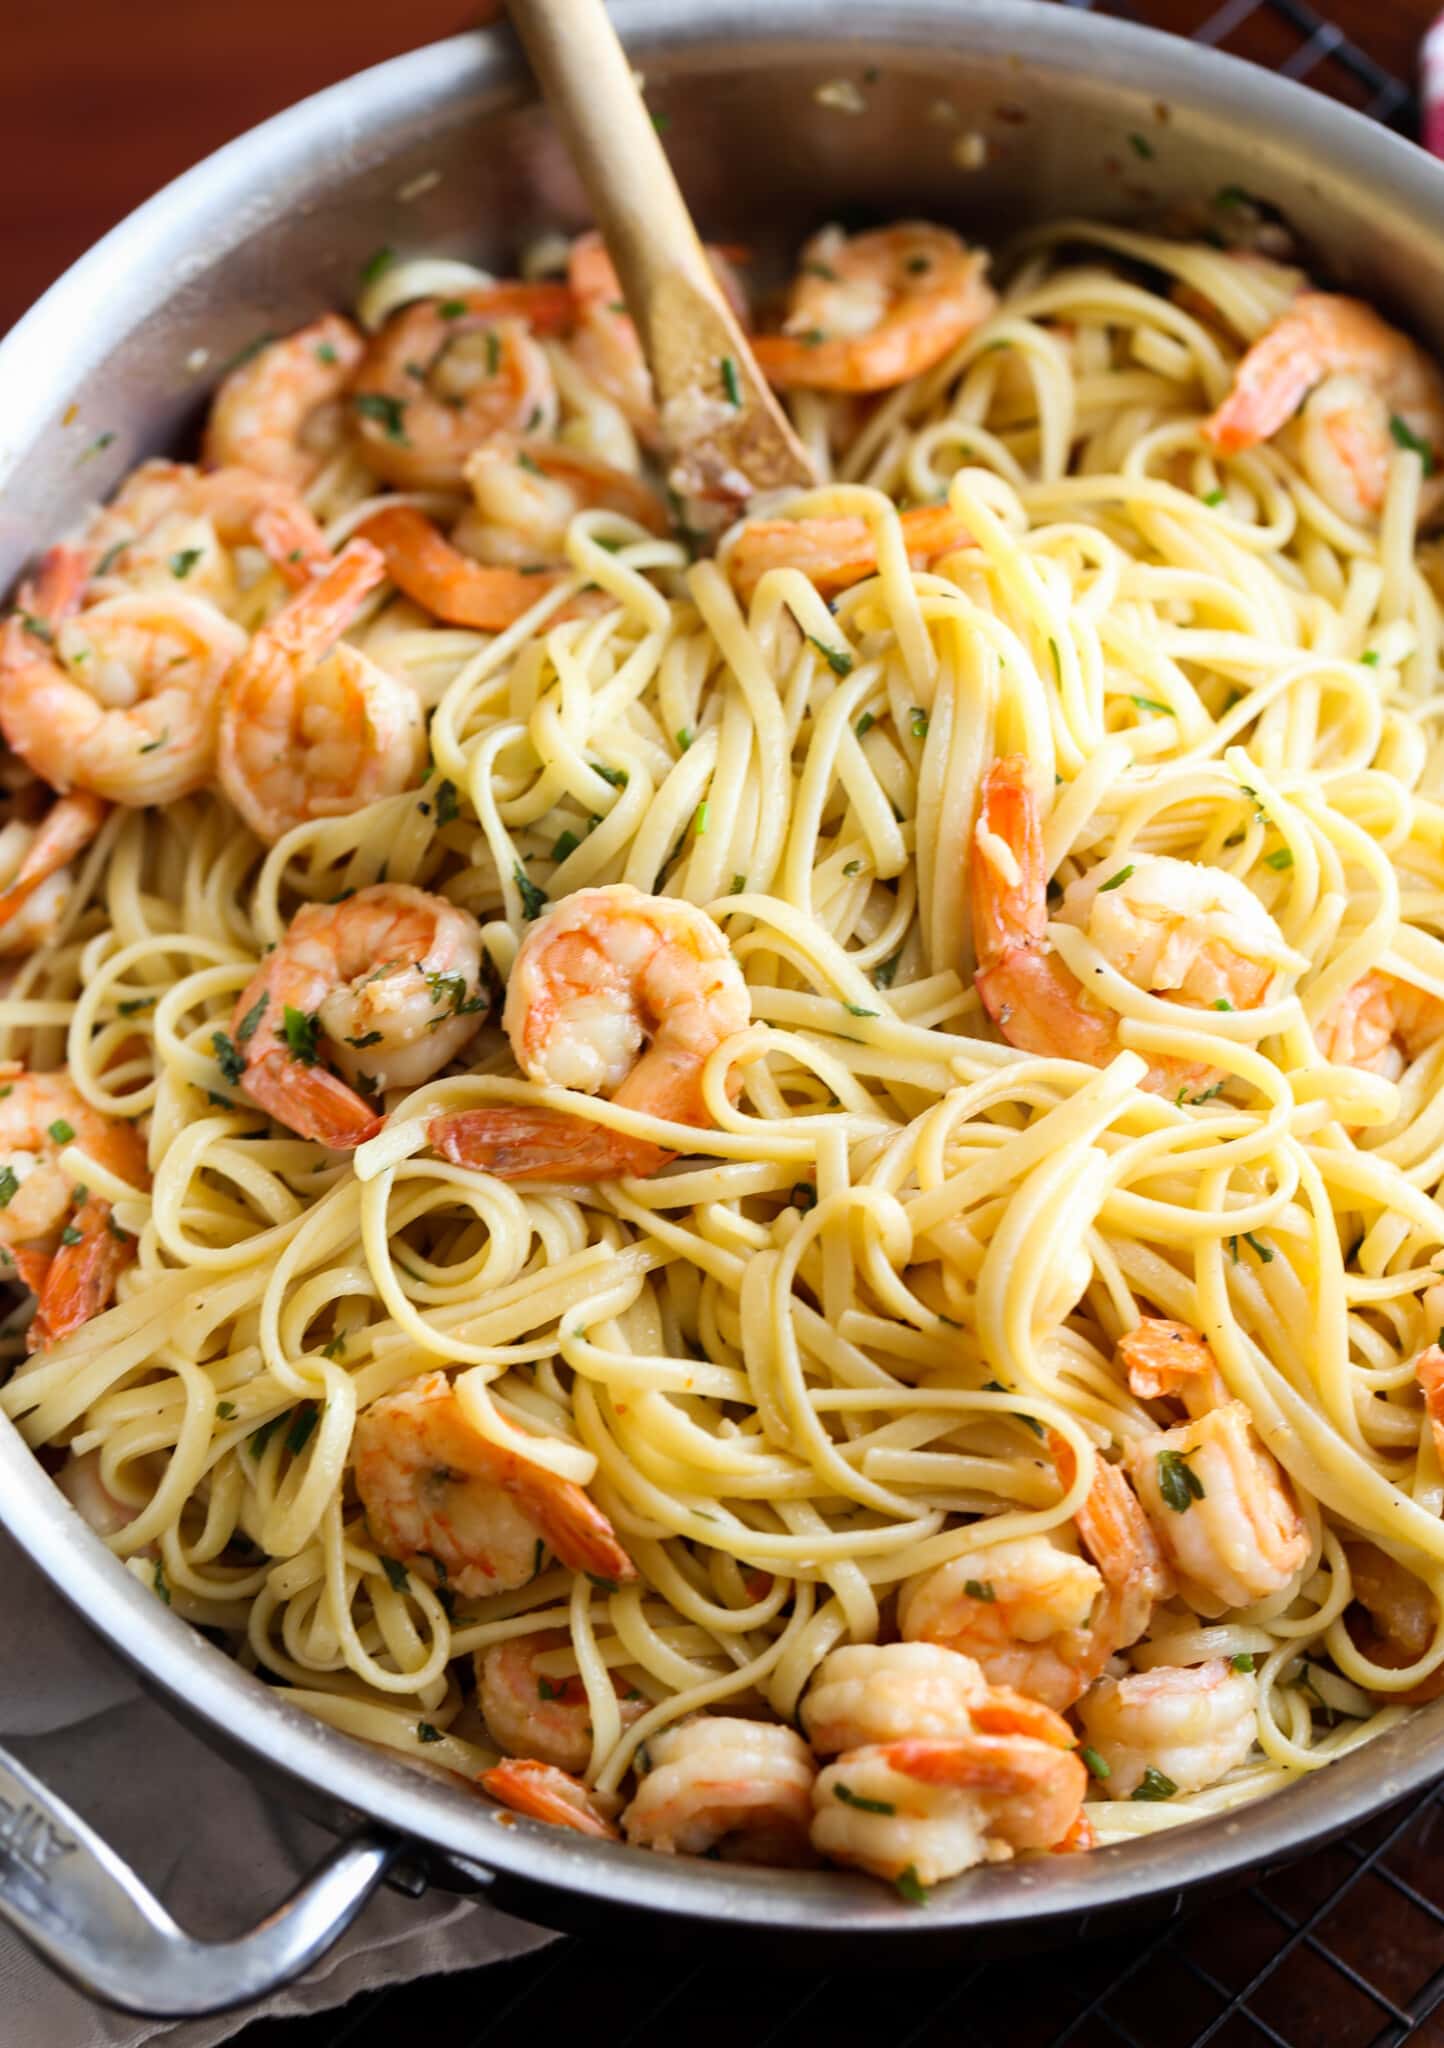 Garlic Butter Shrimp Scampi Recipe | Cookies and Cups